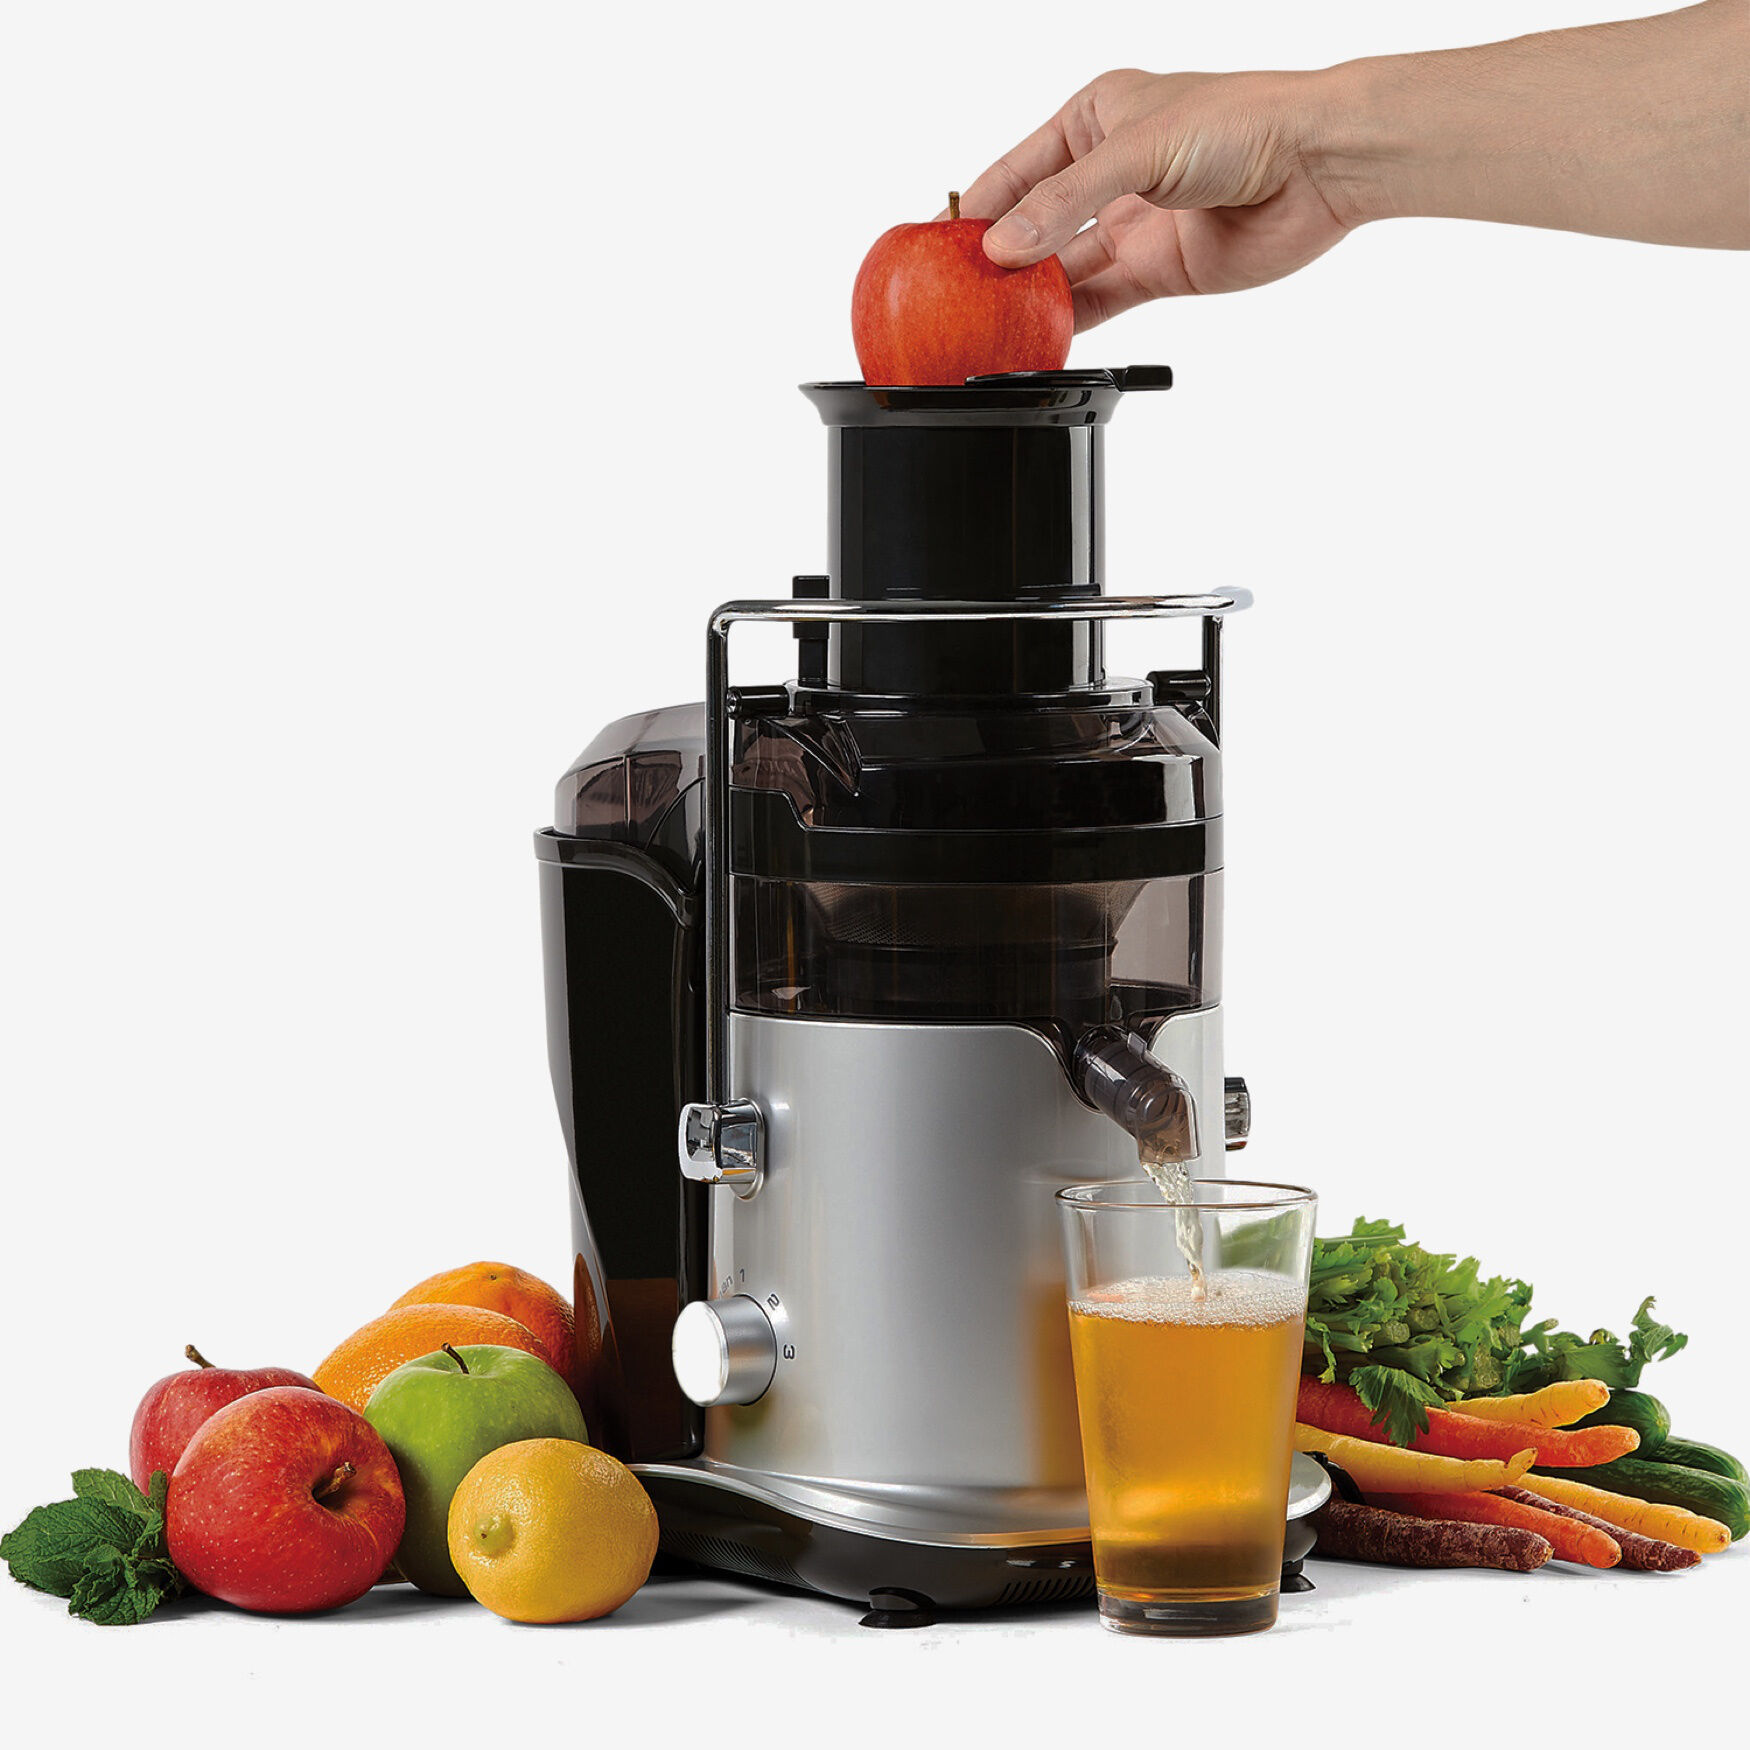 Powerxl self cleaning juicer silver - Home appliances